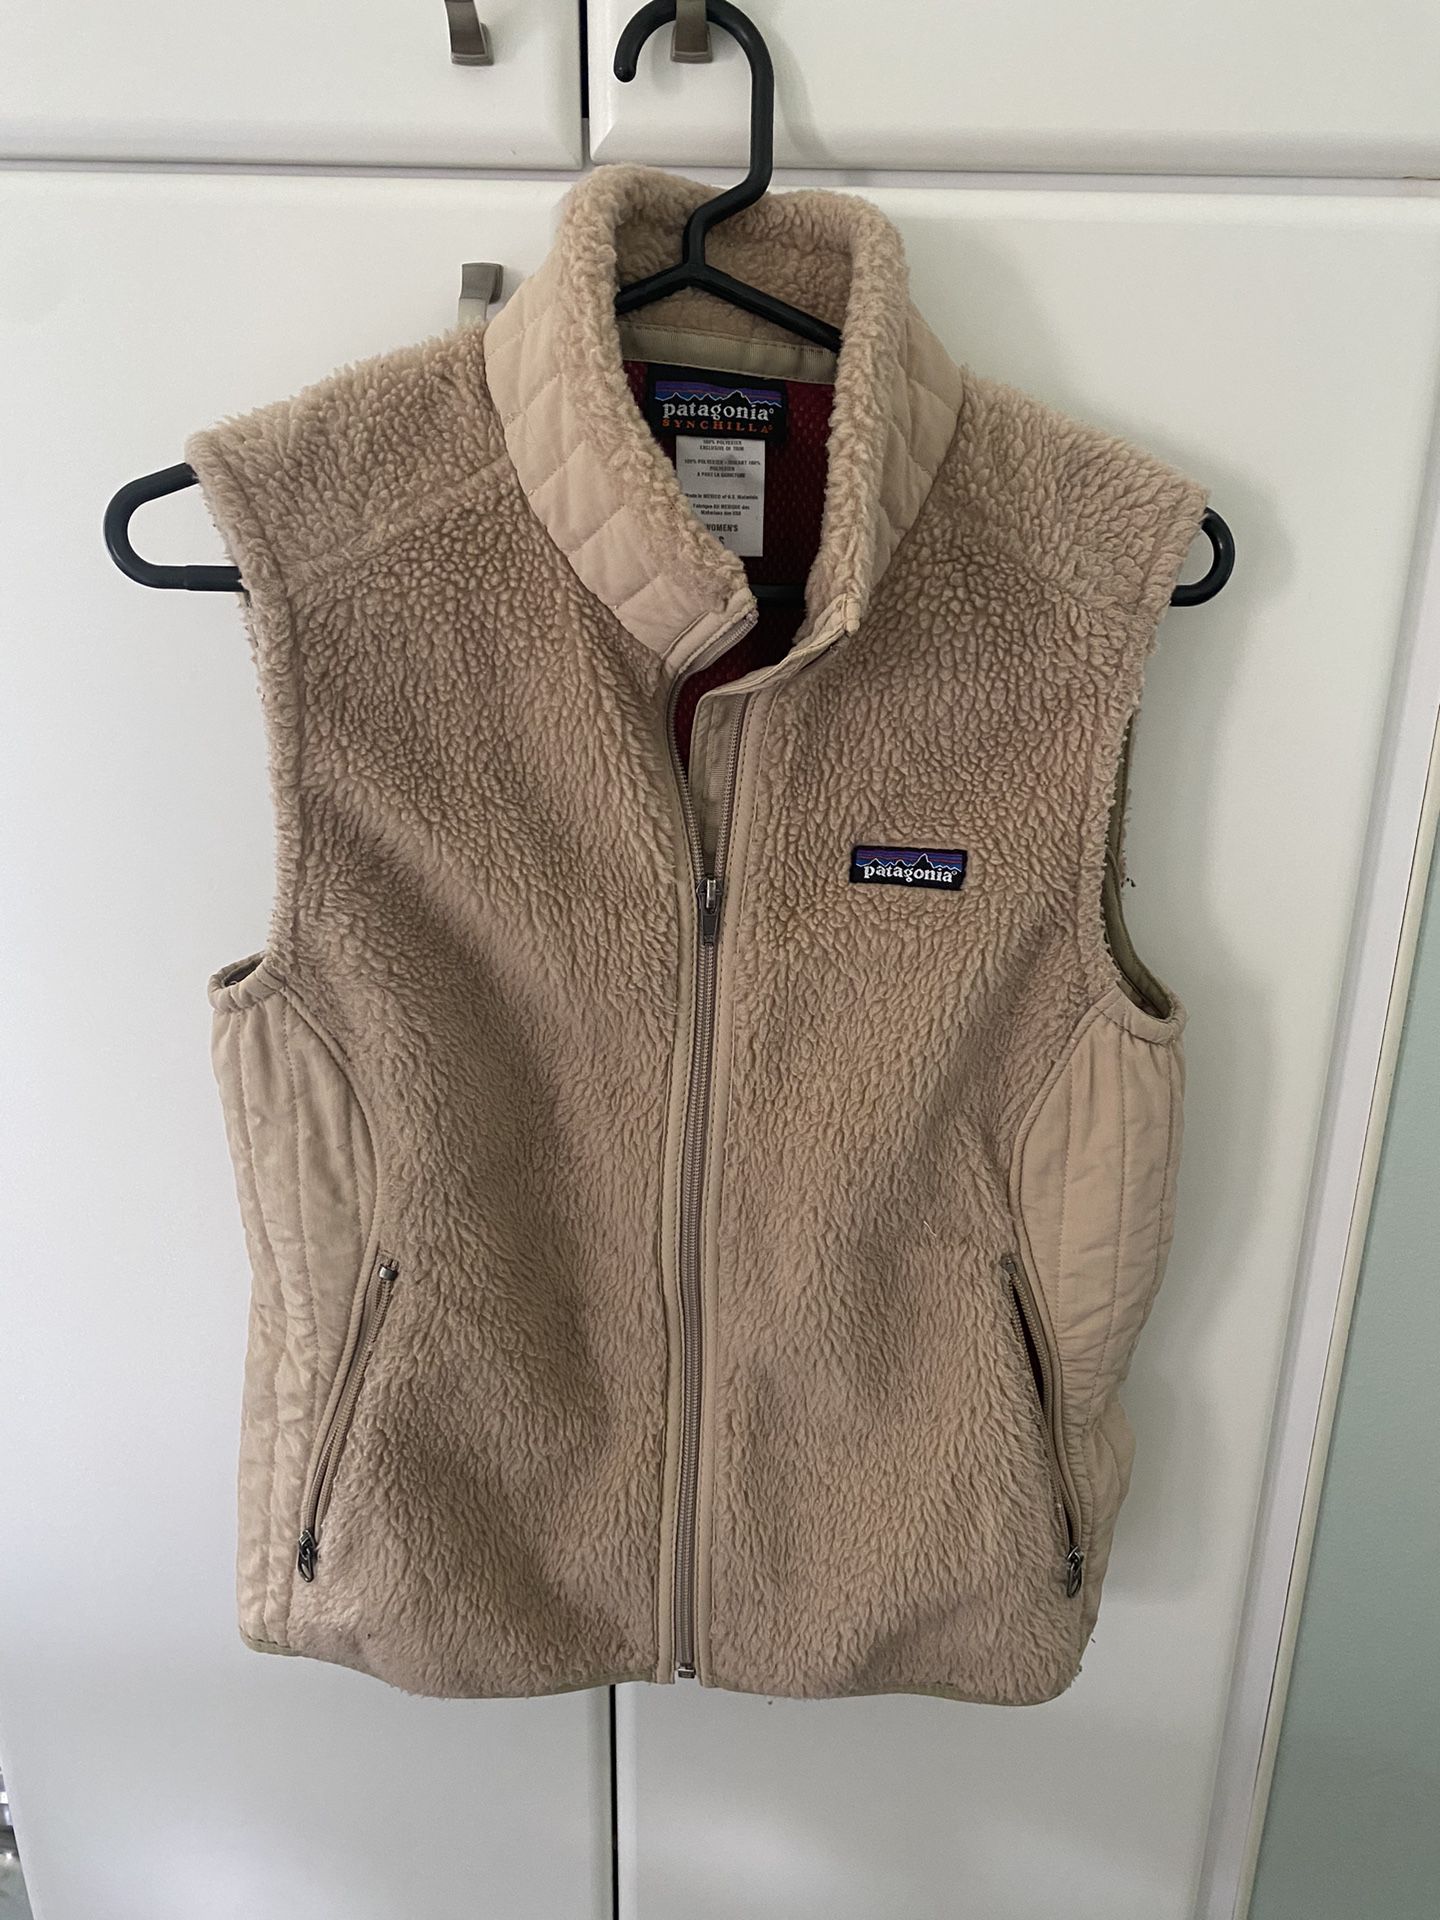 Women’s Patagonia S Small Vest EUC Fast Shipping Classic Clothing USA Athletic 